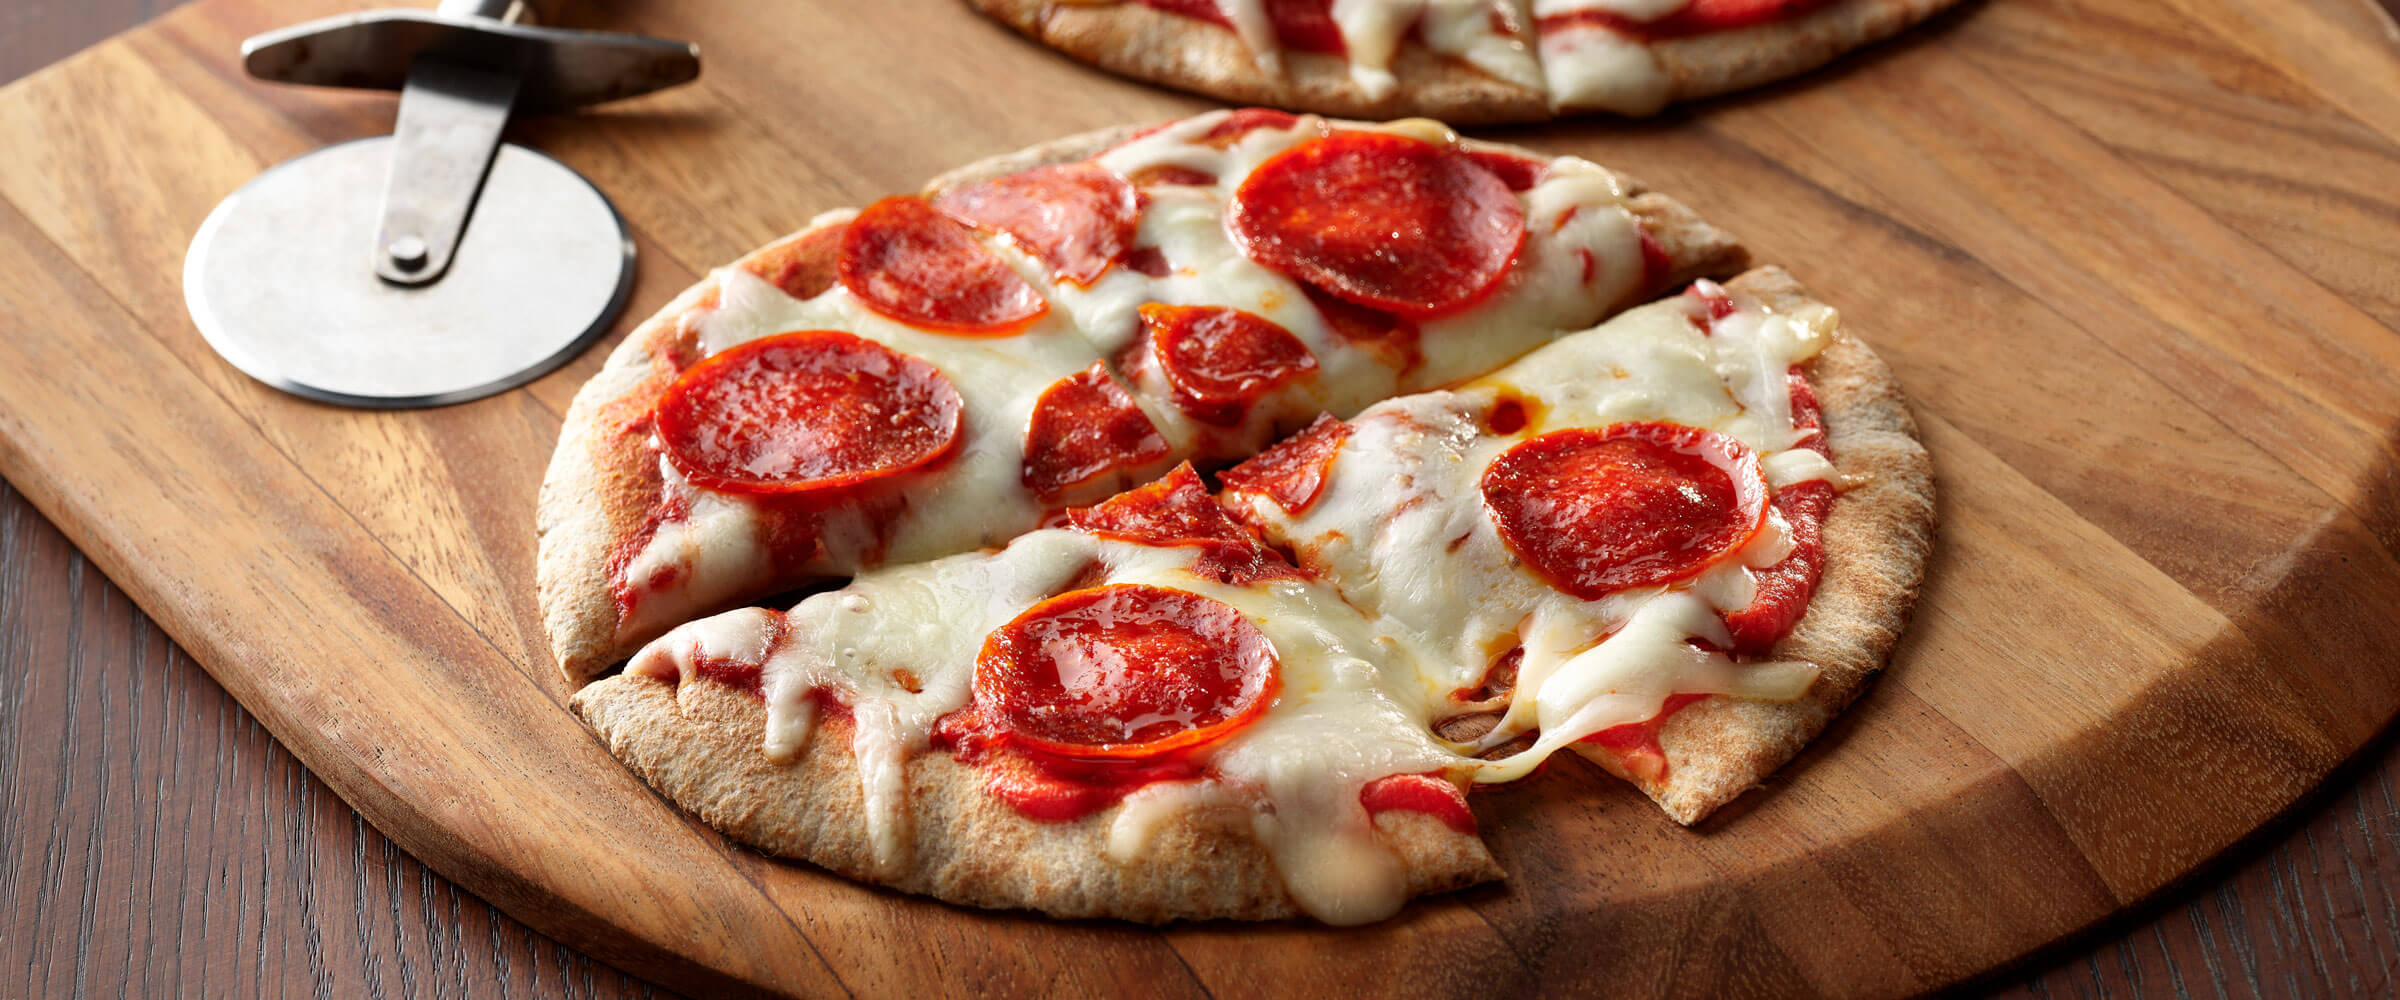 Pepperoni Pita Pizza sliced on wooden board with pizza cutter